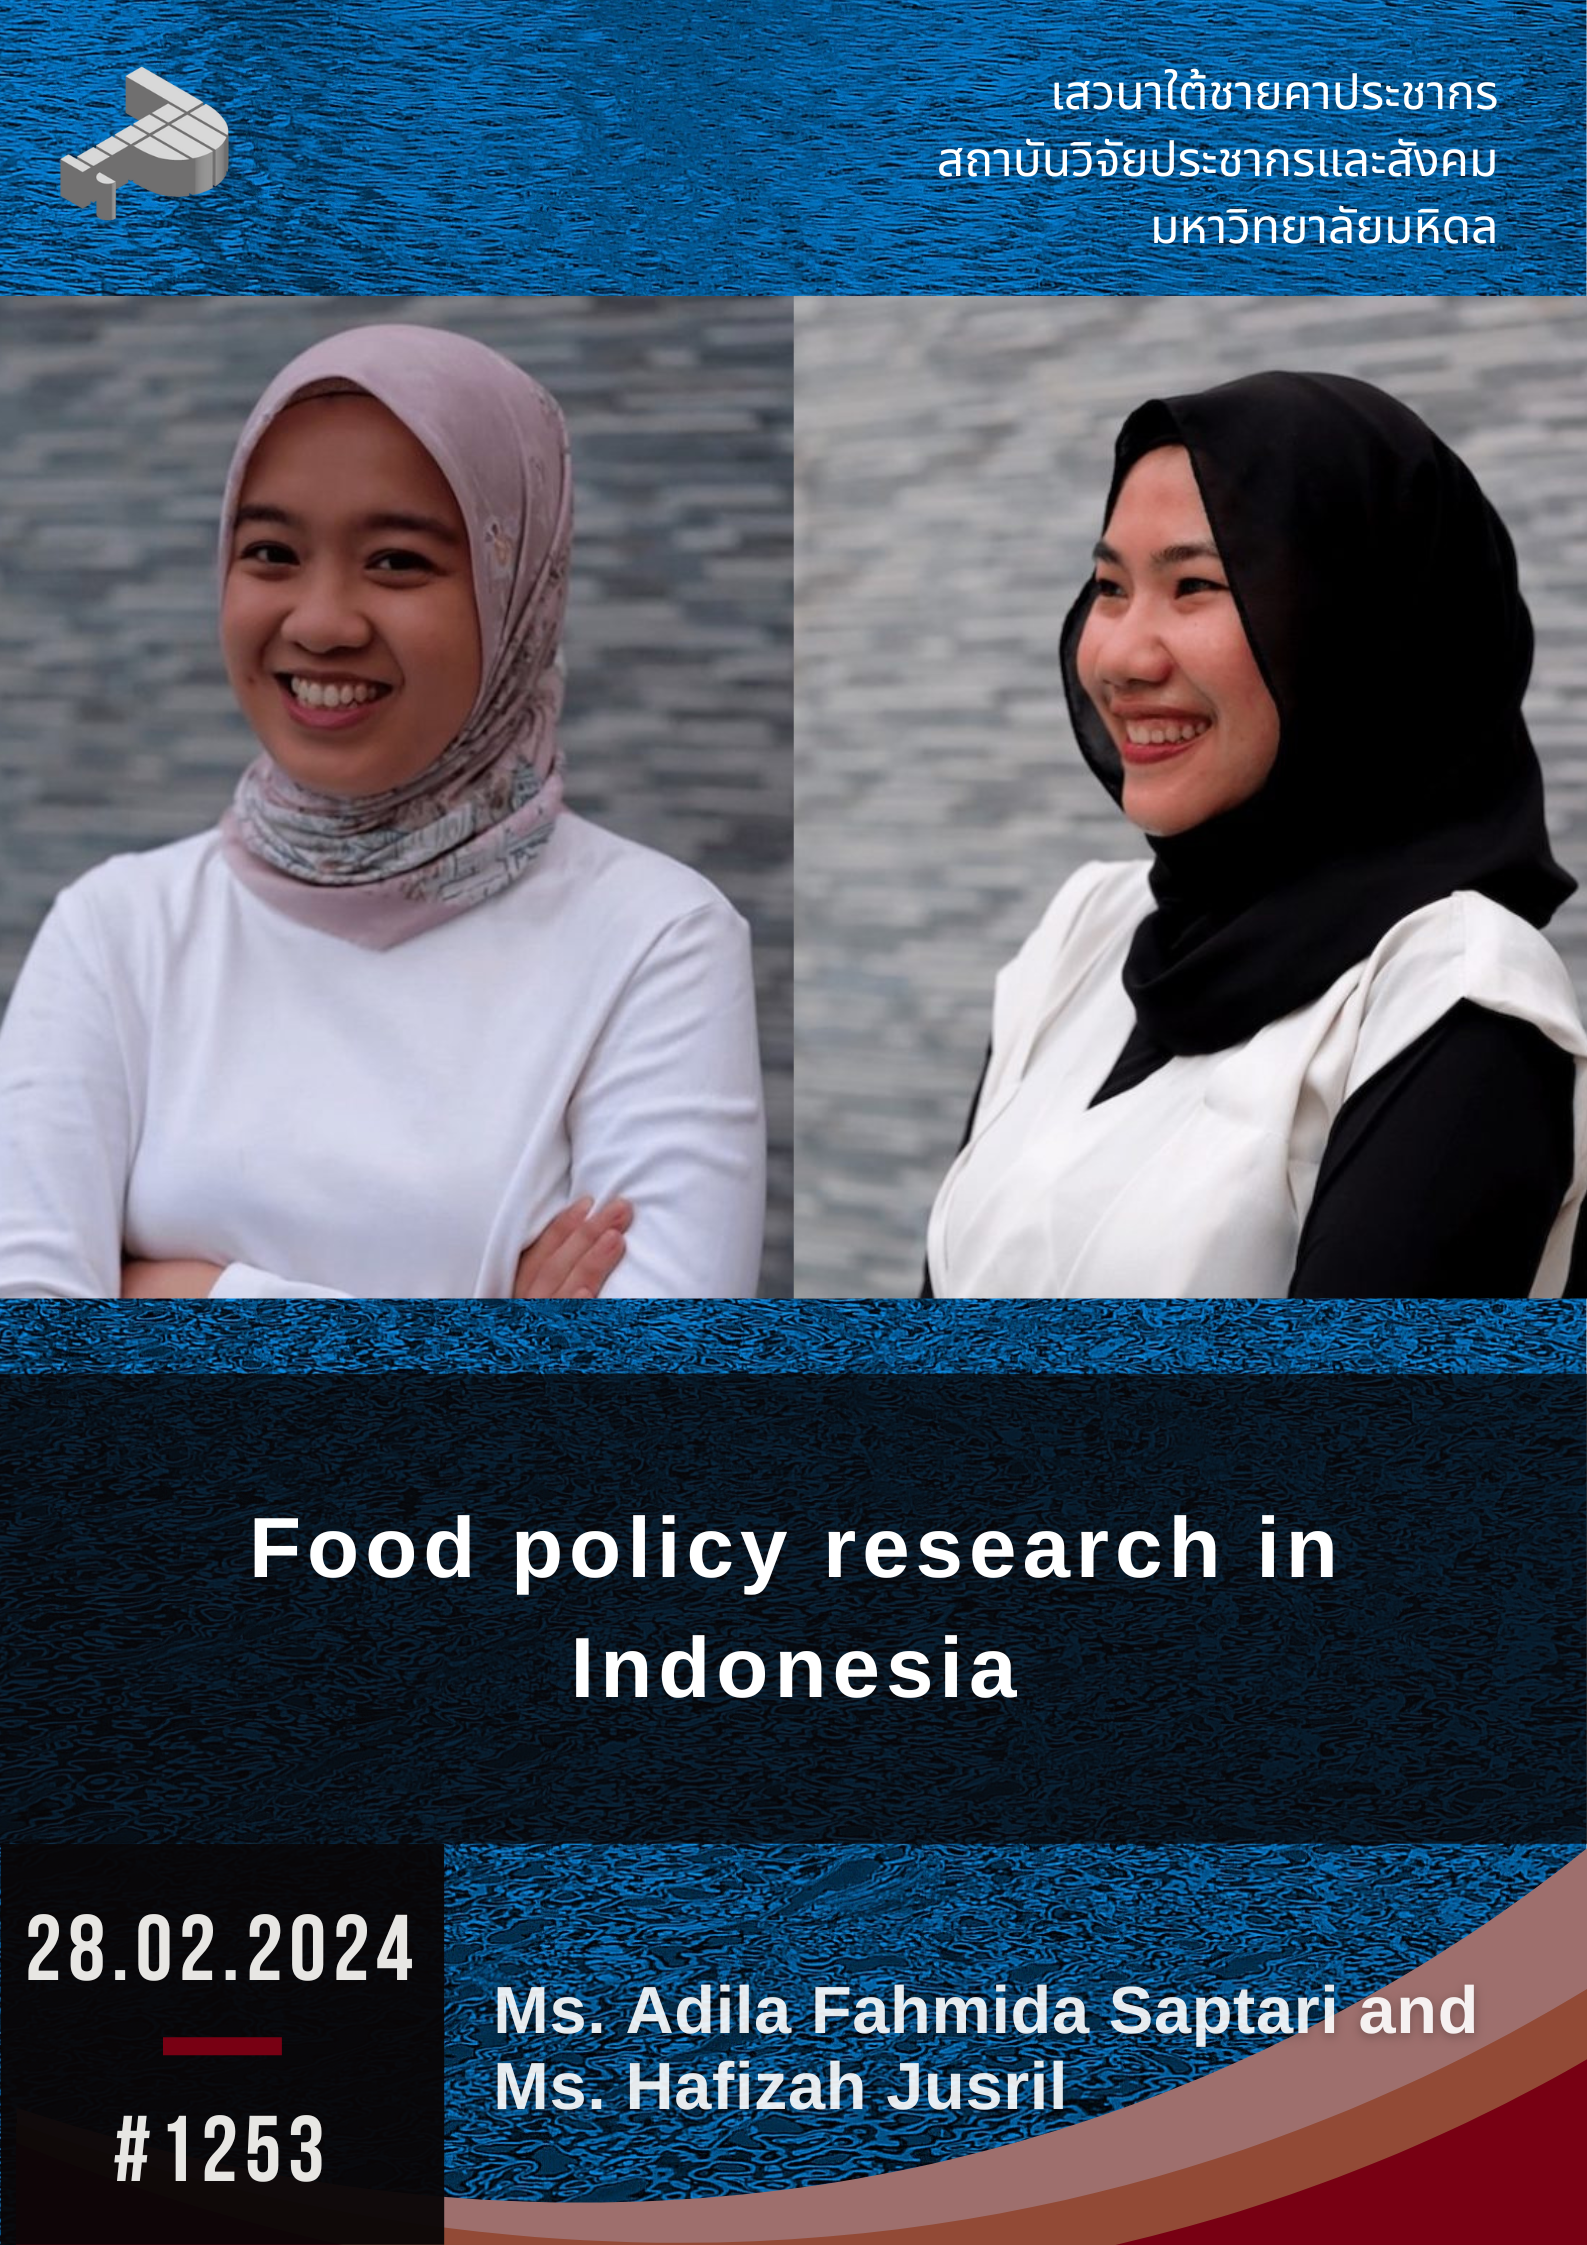 Food policy research in Indonesia